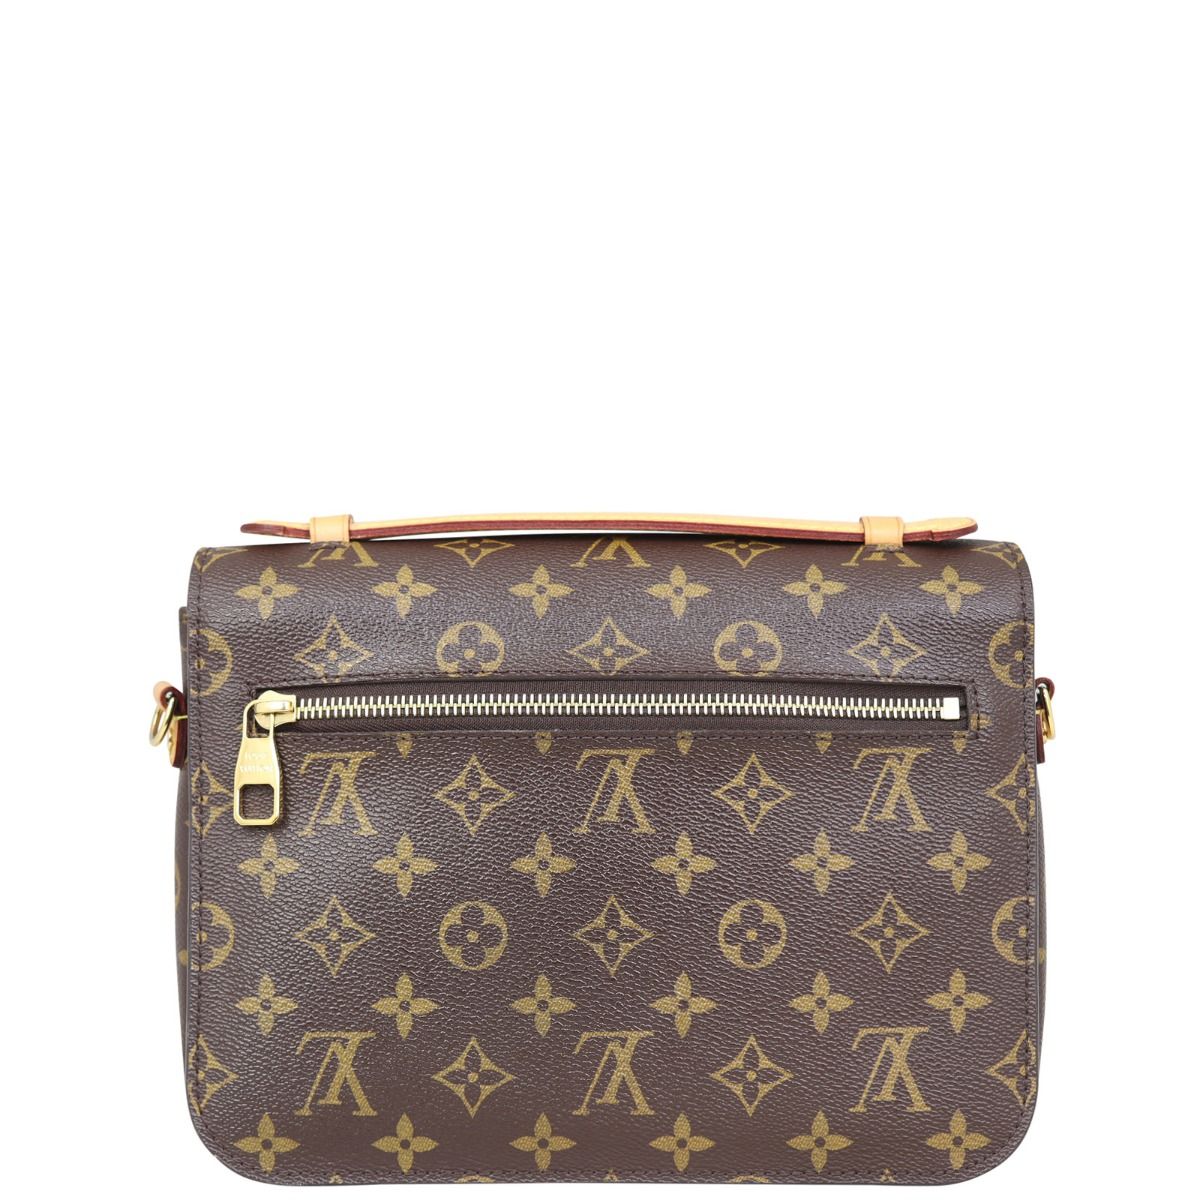 Louis Vuitton, Bags, Nwt Louis Vuitton Pochette Metis In Reverse Monogram  Made In France Date Code